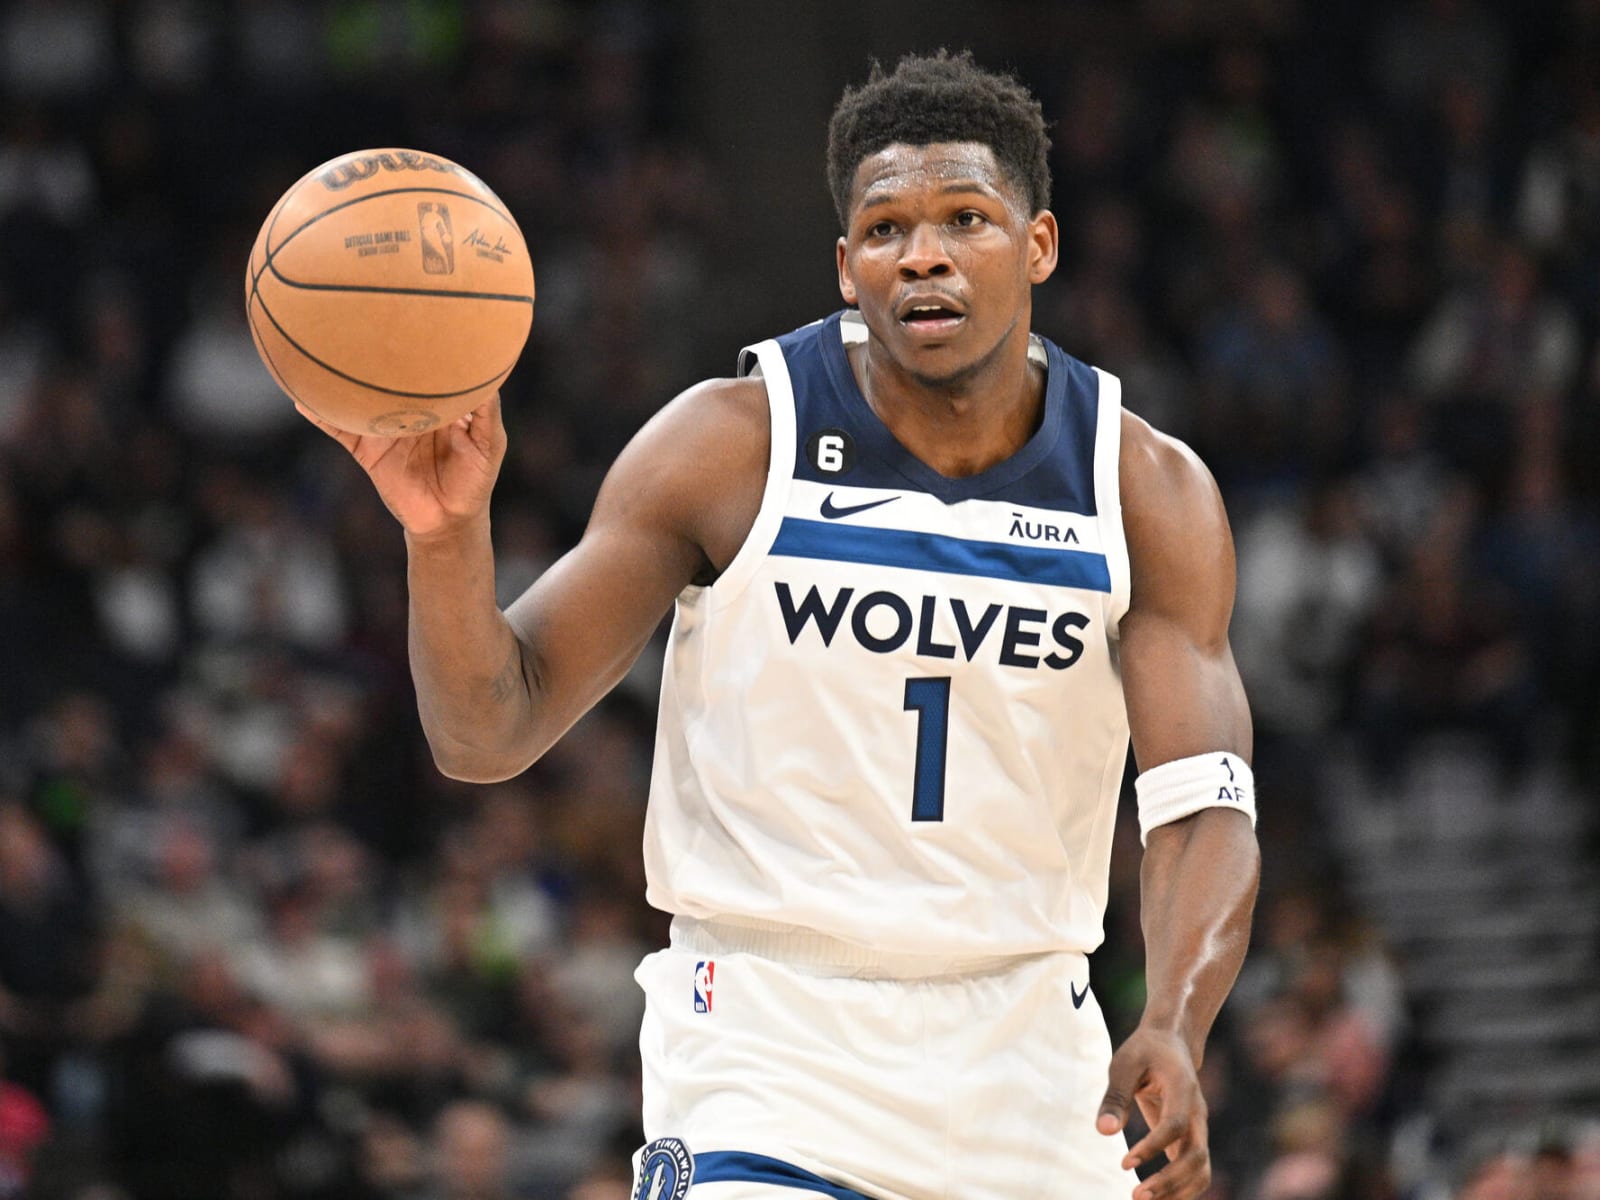 NBA: Timberwolves Guard Anthony Edwards to Switch Jersey Number